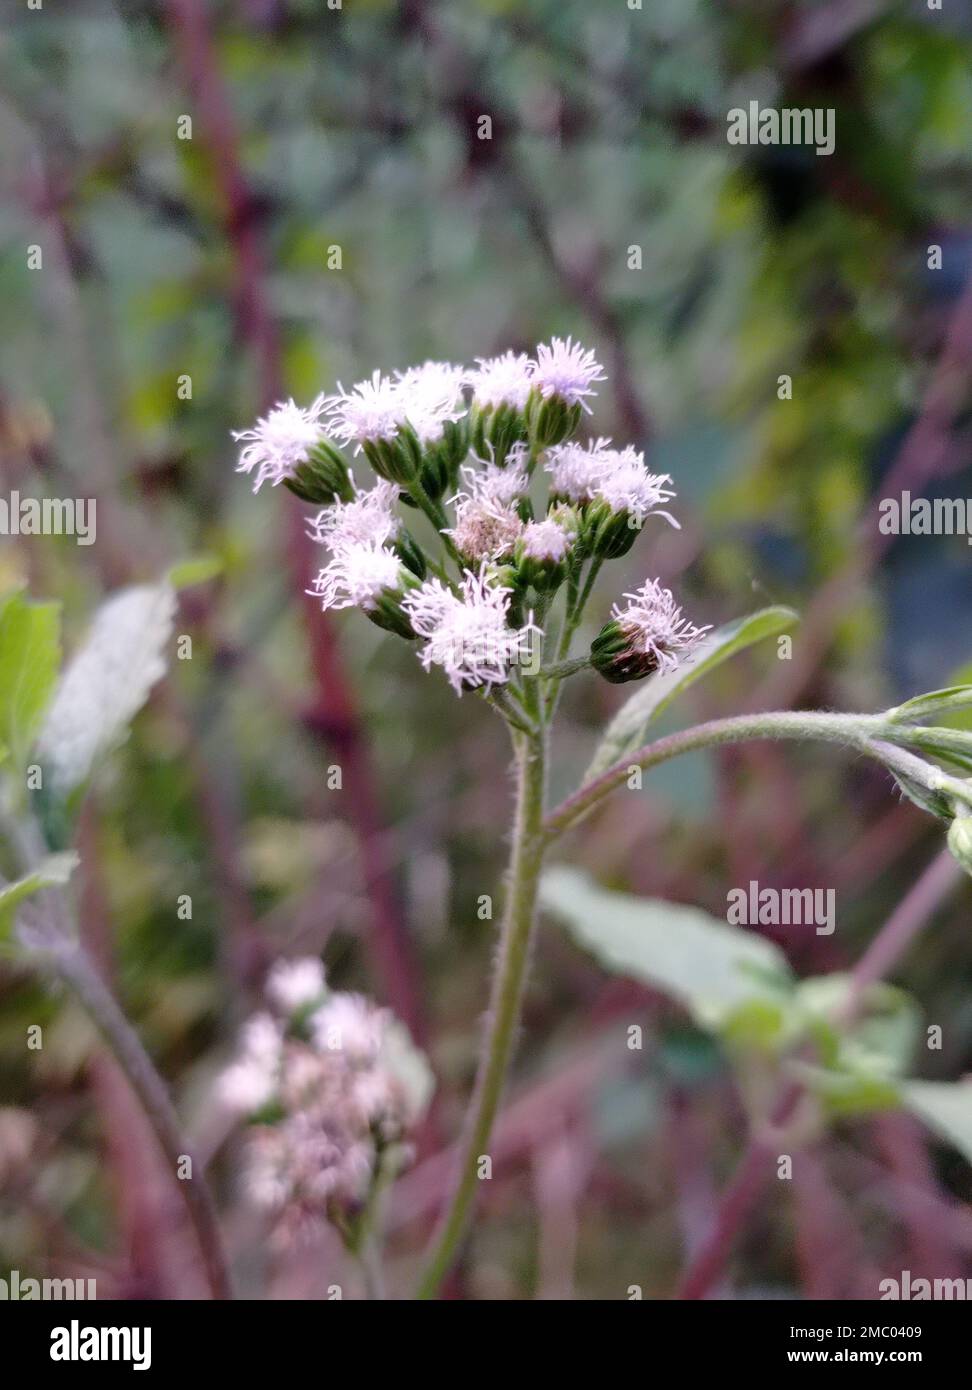 A vertical selective focus view of invasive Billygoat weed plant in a meadow Stock Photo